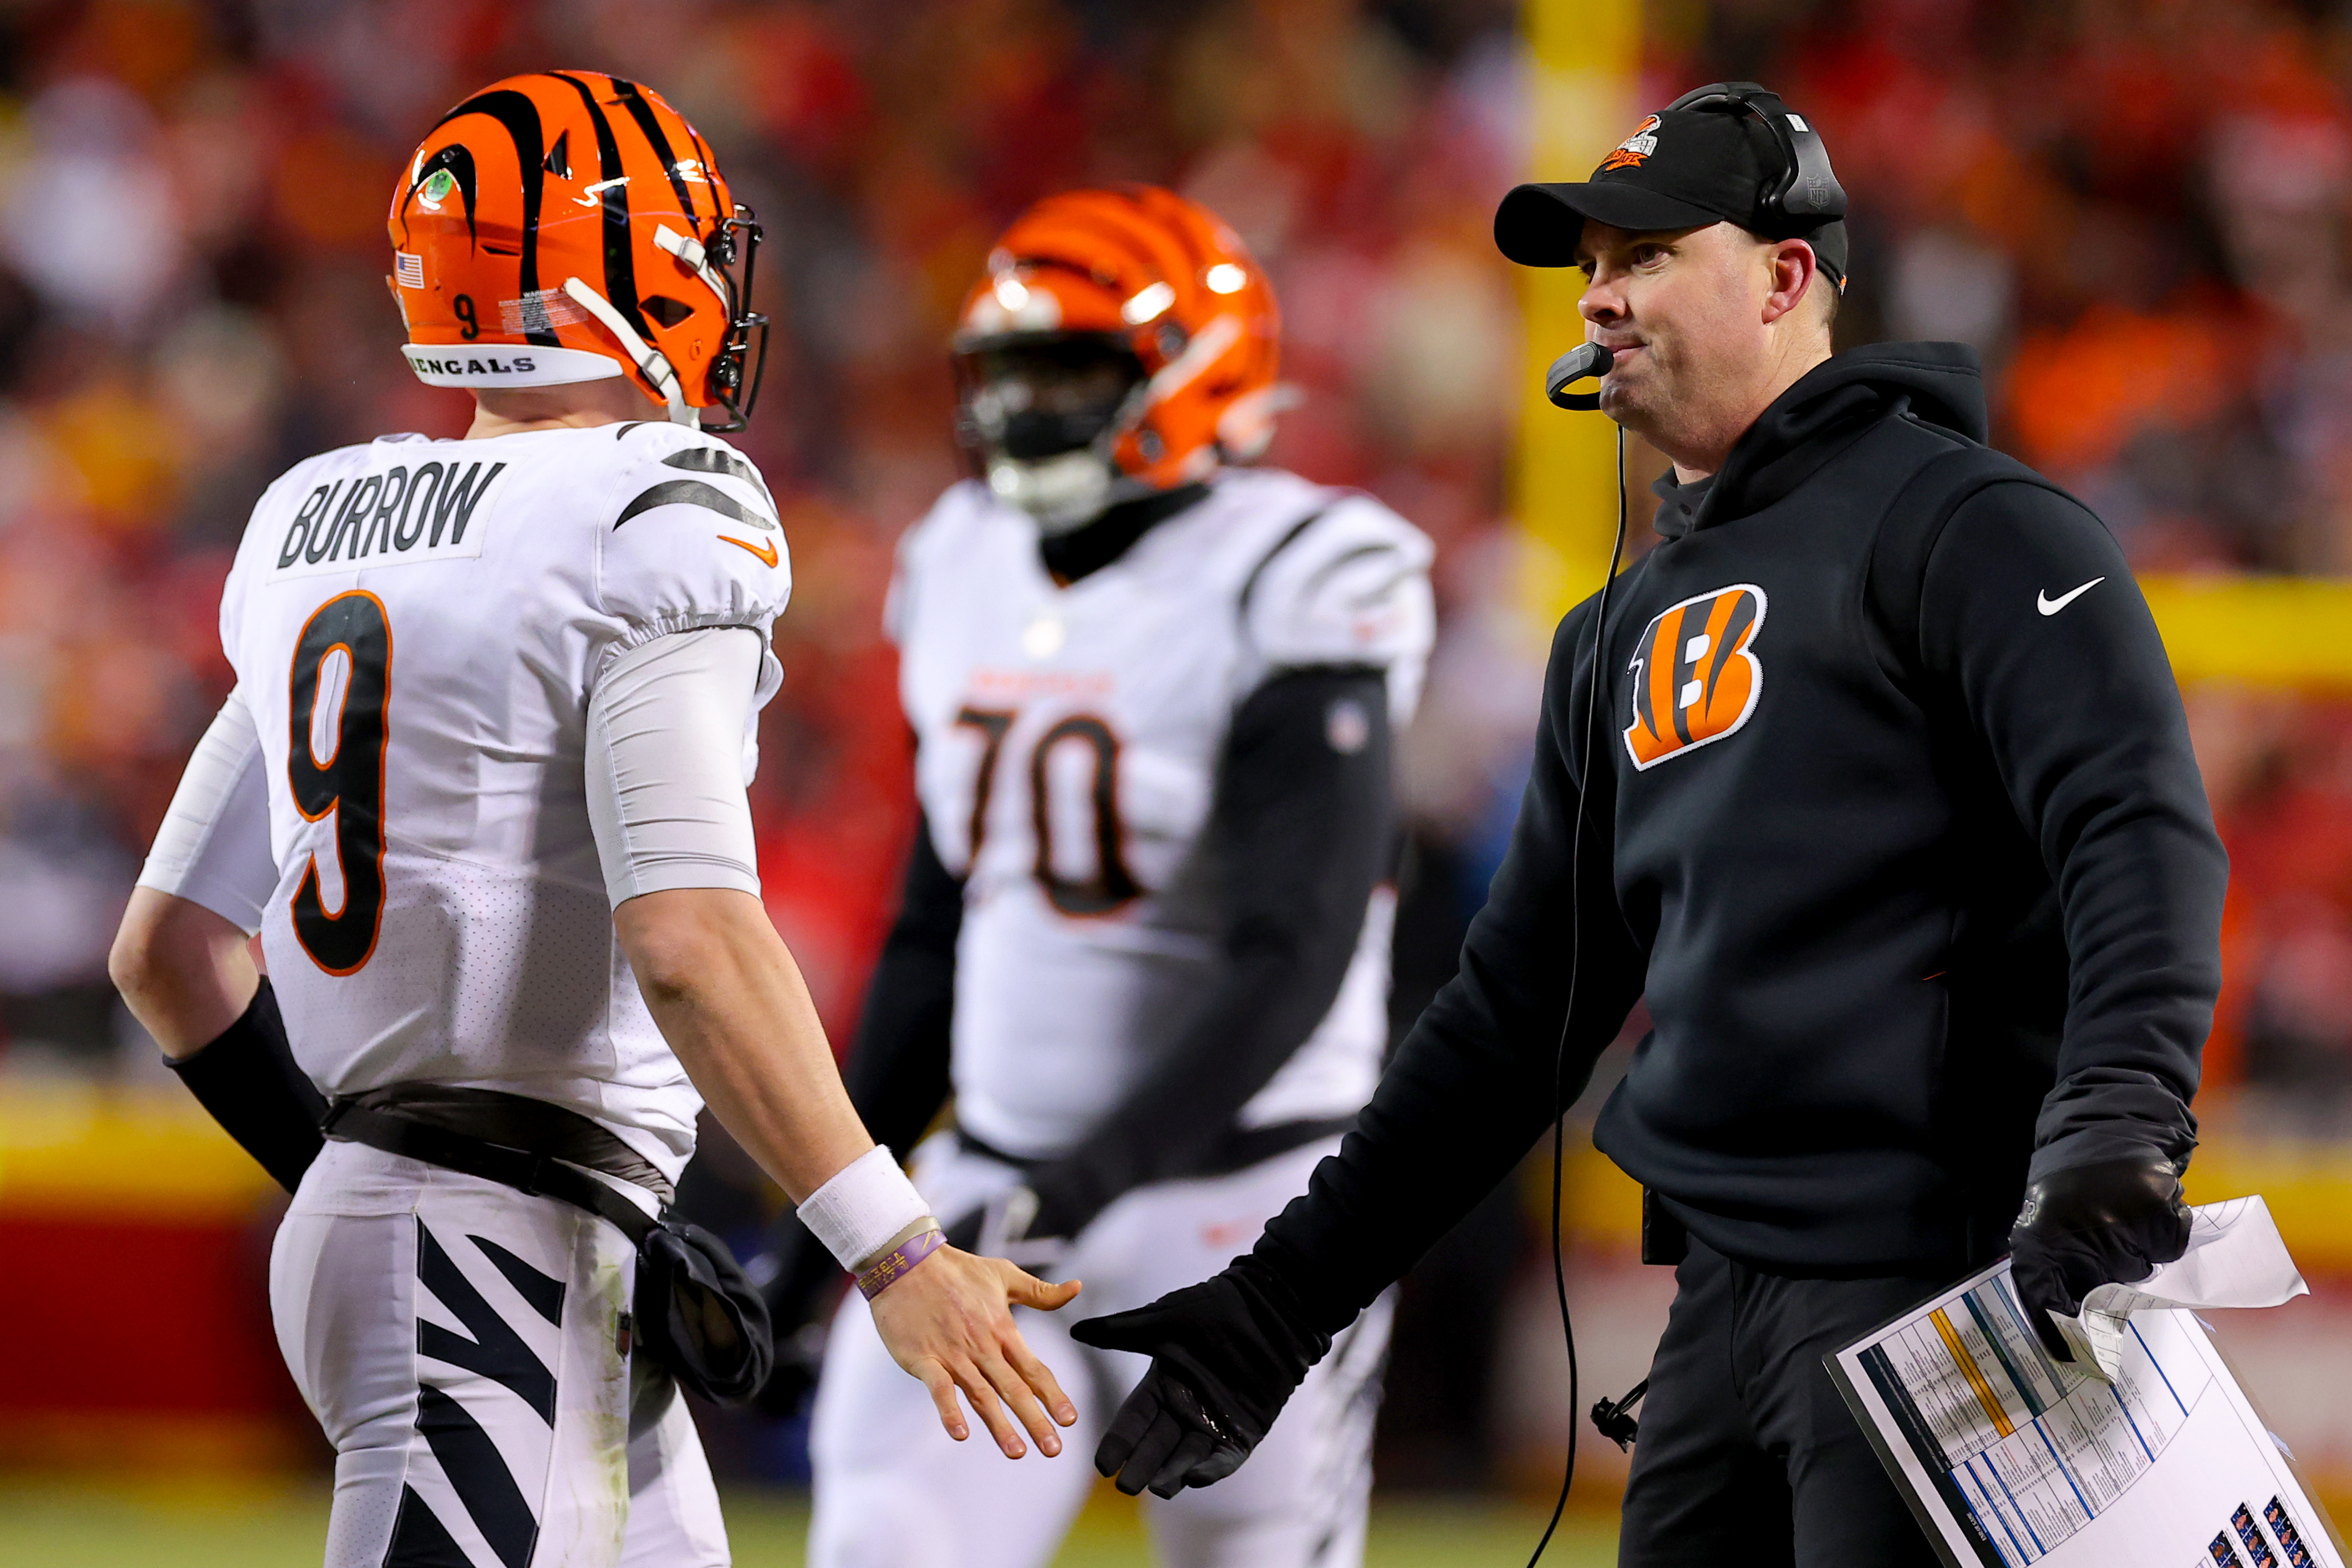 Joe Burrow #9 and head coach Zac Taylor of the Cincinnati Bengals celebrate after a touchdown against the Kansas City Chiefs during the fourth quarter in the AFC Championship Game at GEHA Field at Arrowhead Stadium on January 29, 2023 in Kansas City, Missouri.